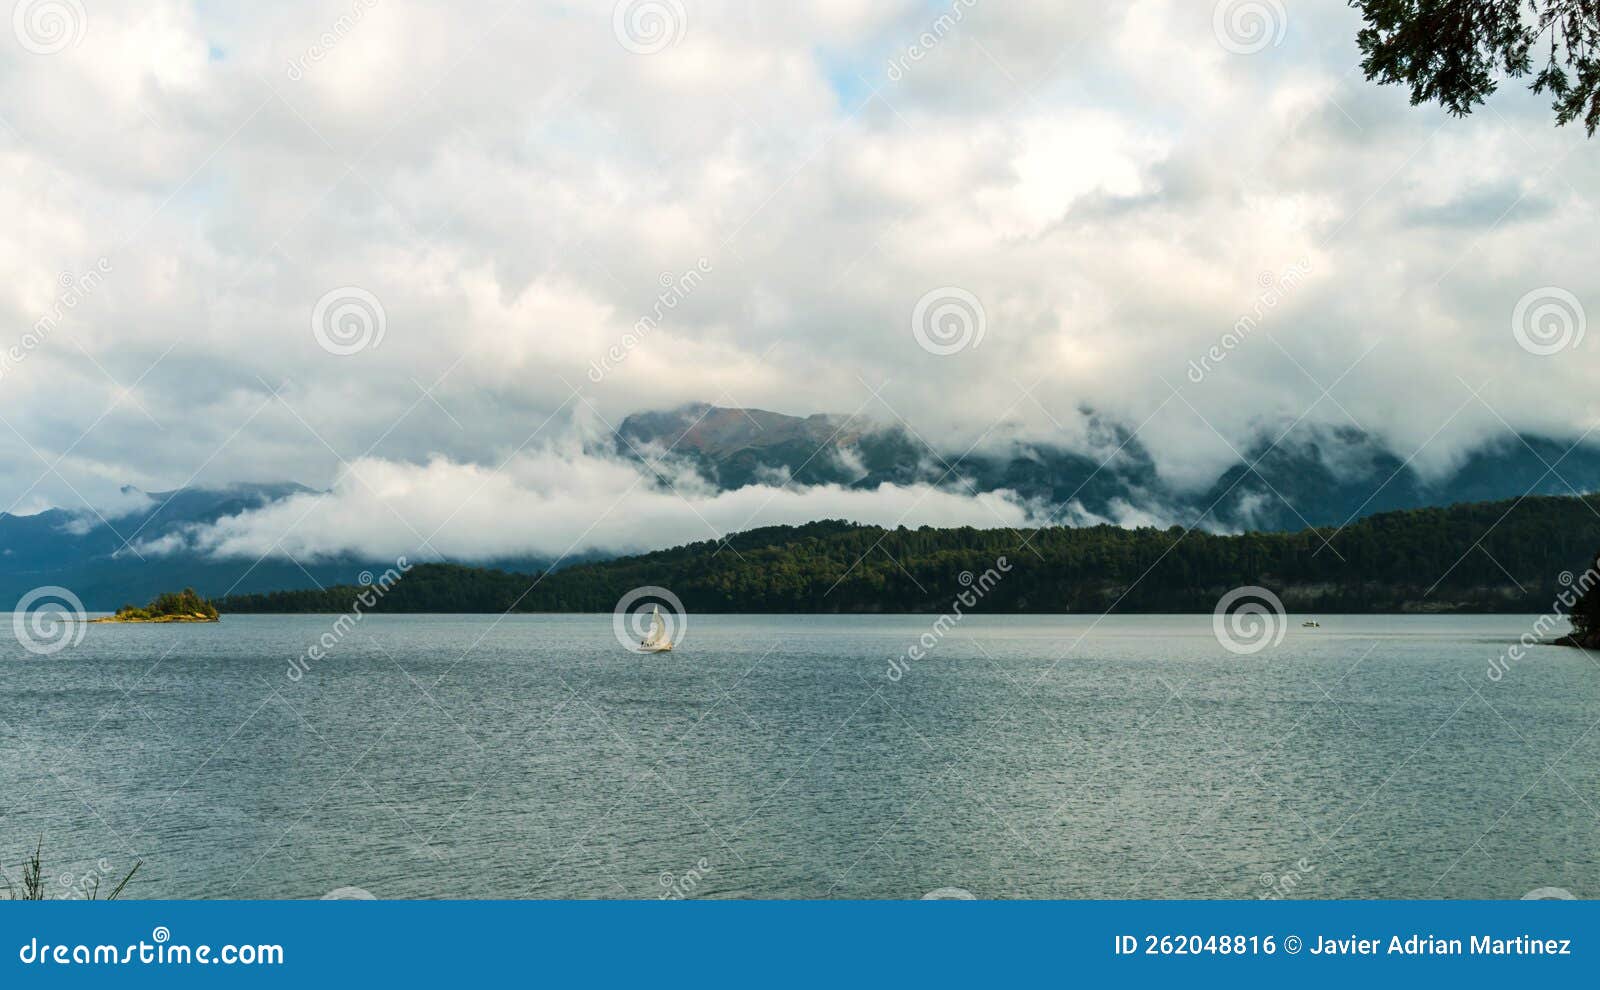 sailboat navigating a calm lake with low clouds and mountains in the background. villa la angostura, argentina